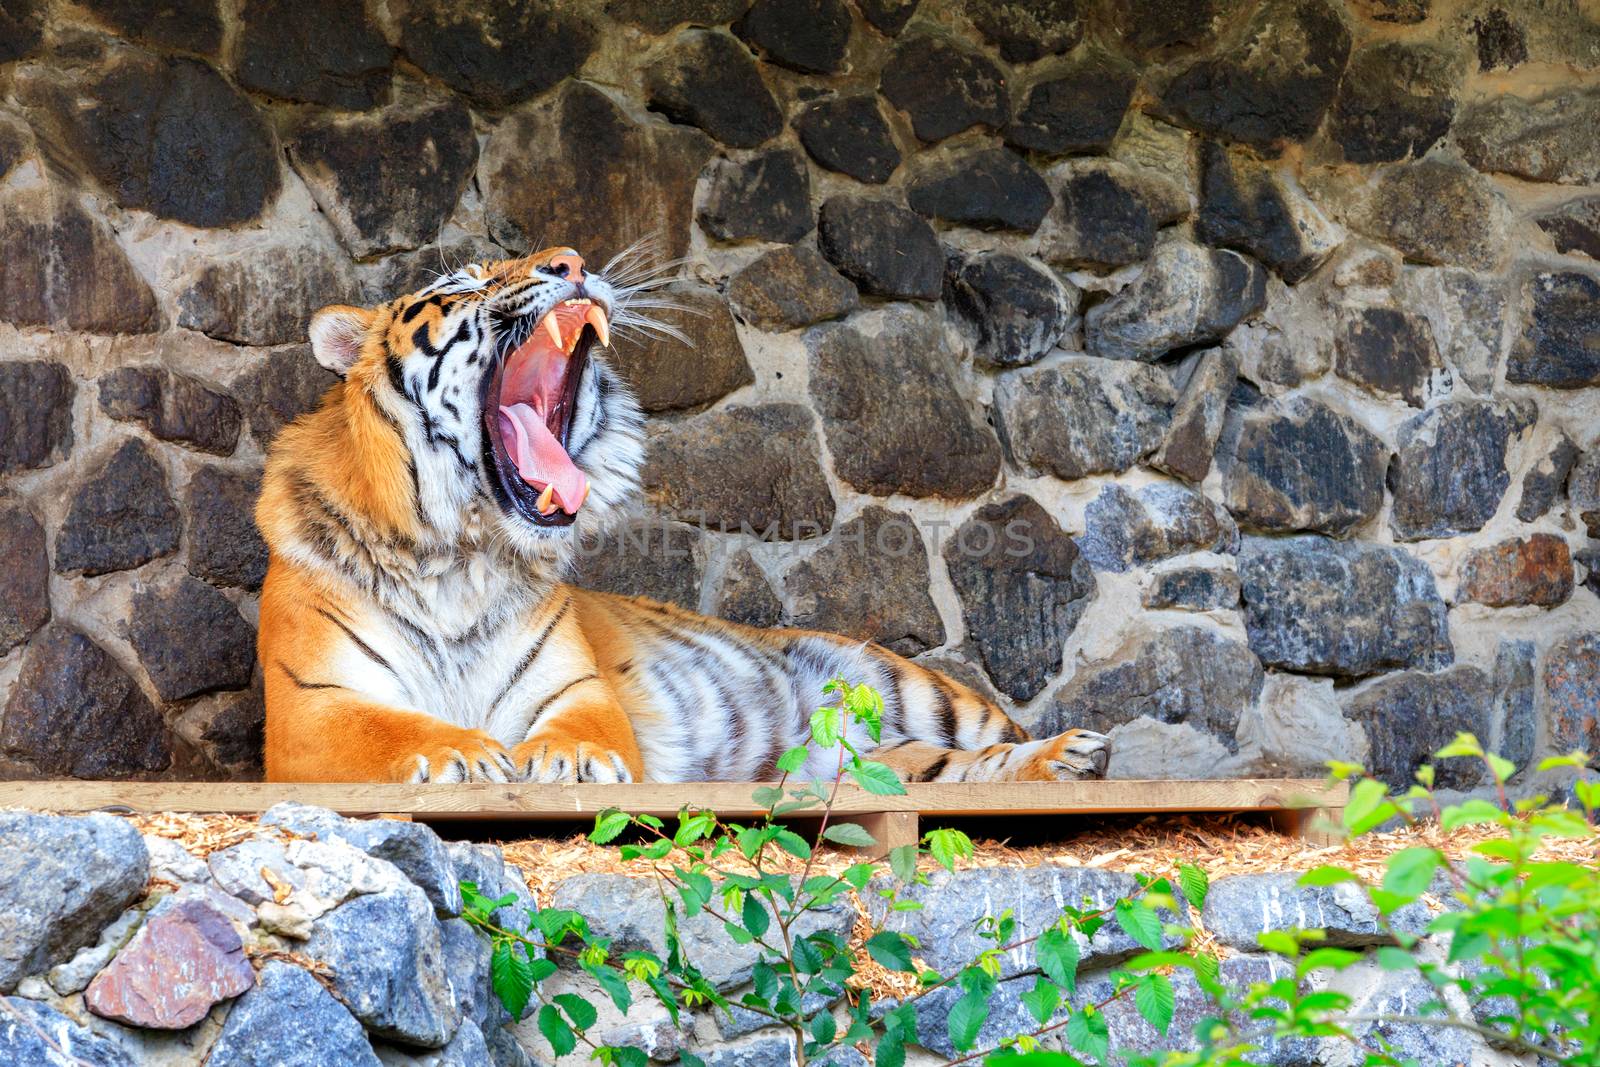 The tiger lies on a wooden platform near a stone wall with its mouth wide open and showing its tongue with powerful fangs.